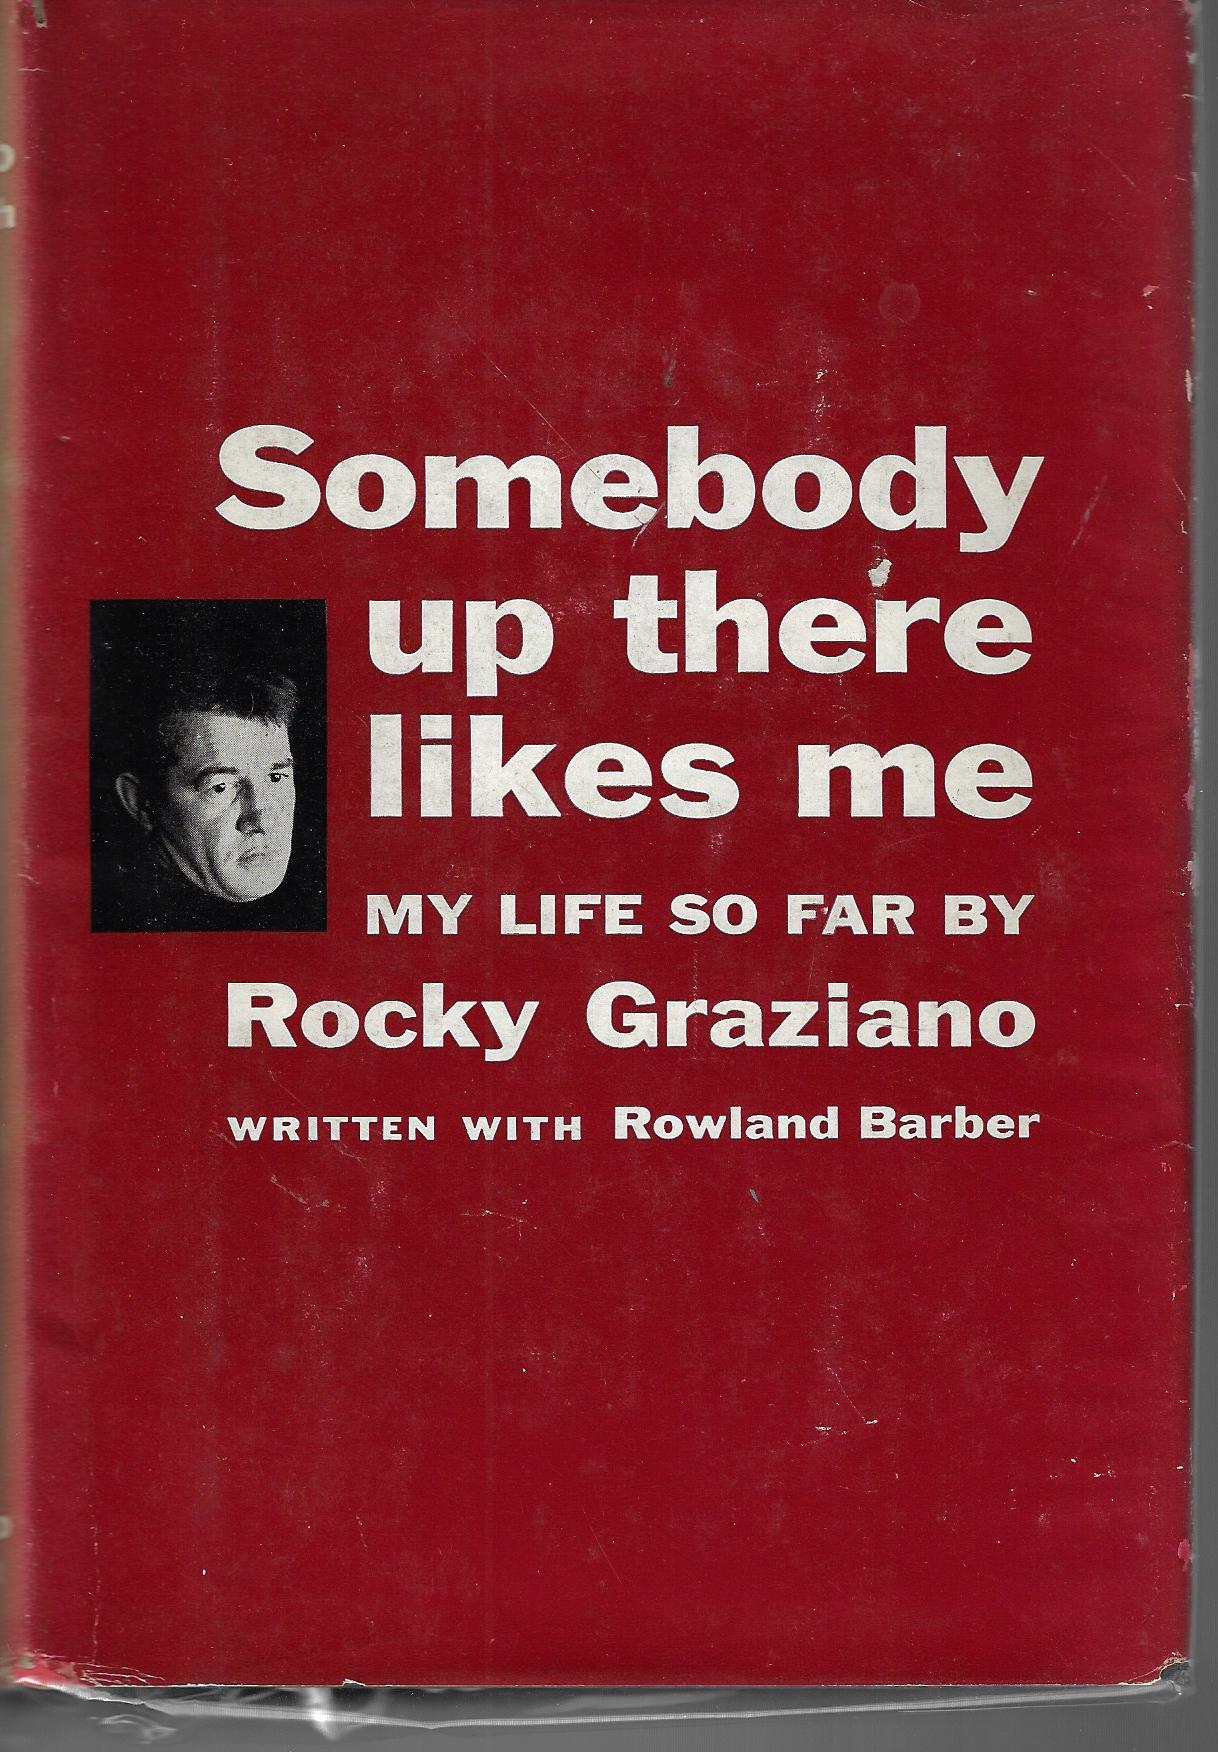 Graziano, Rocky and Barber, Rowland - Somebody up there likes me - boksen -My life so far by Rocky Graziano